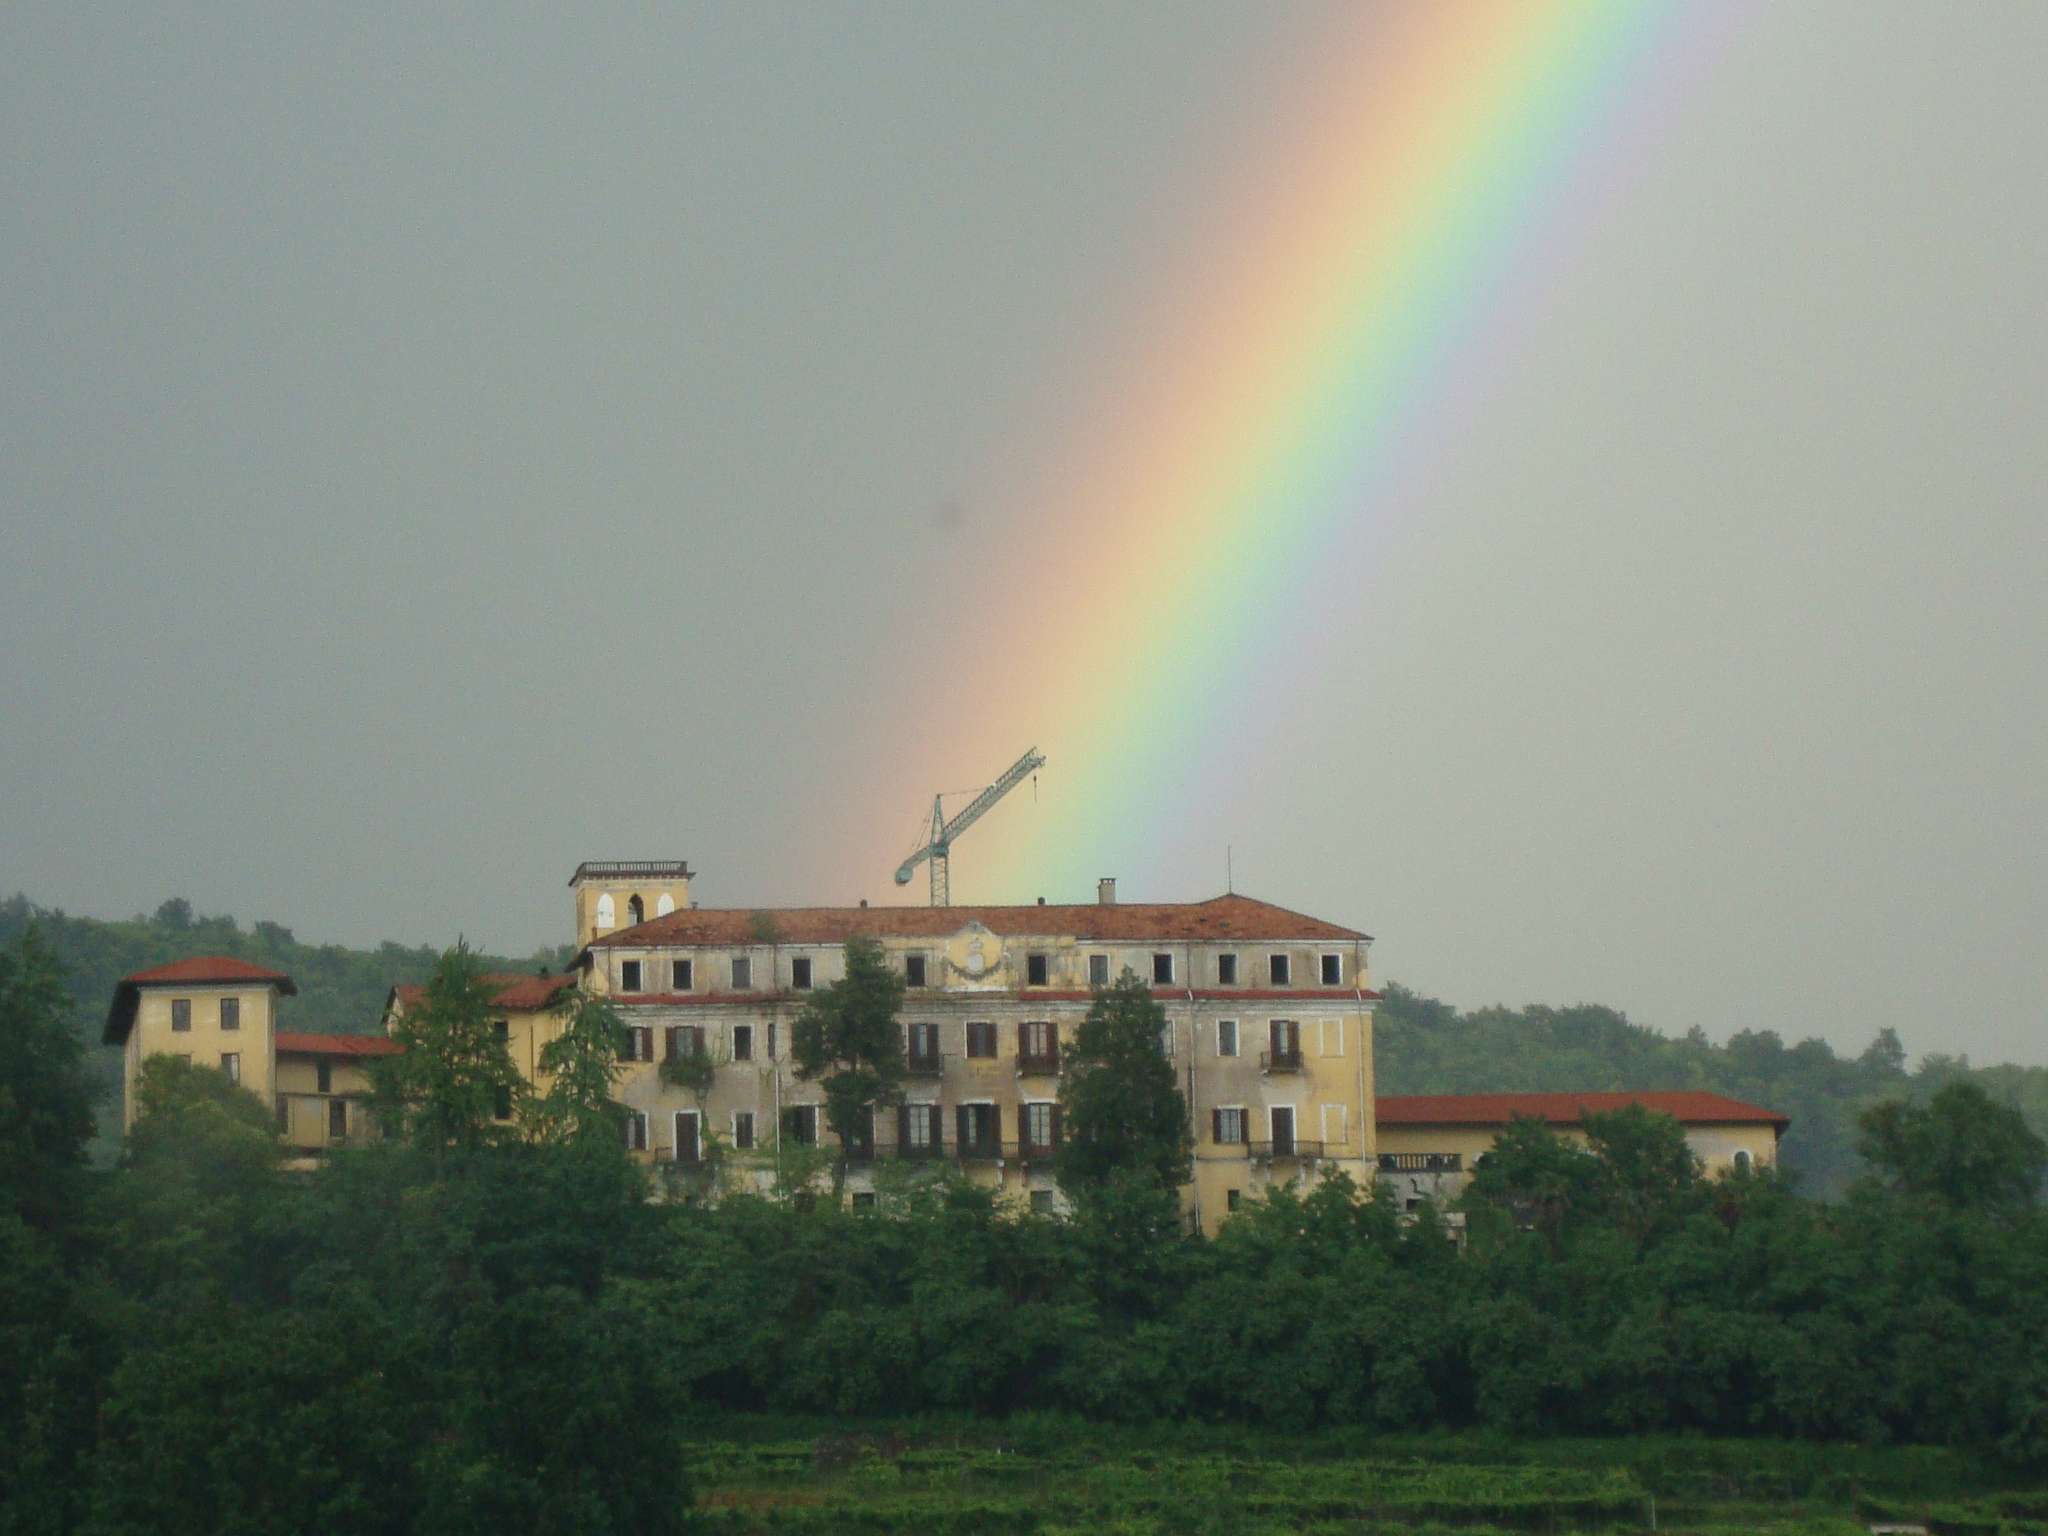 Rainbow over Bollengo castle: 144 KB; click on the image to enlarge